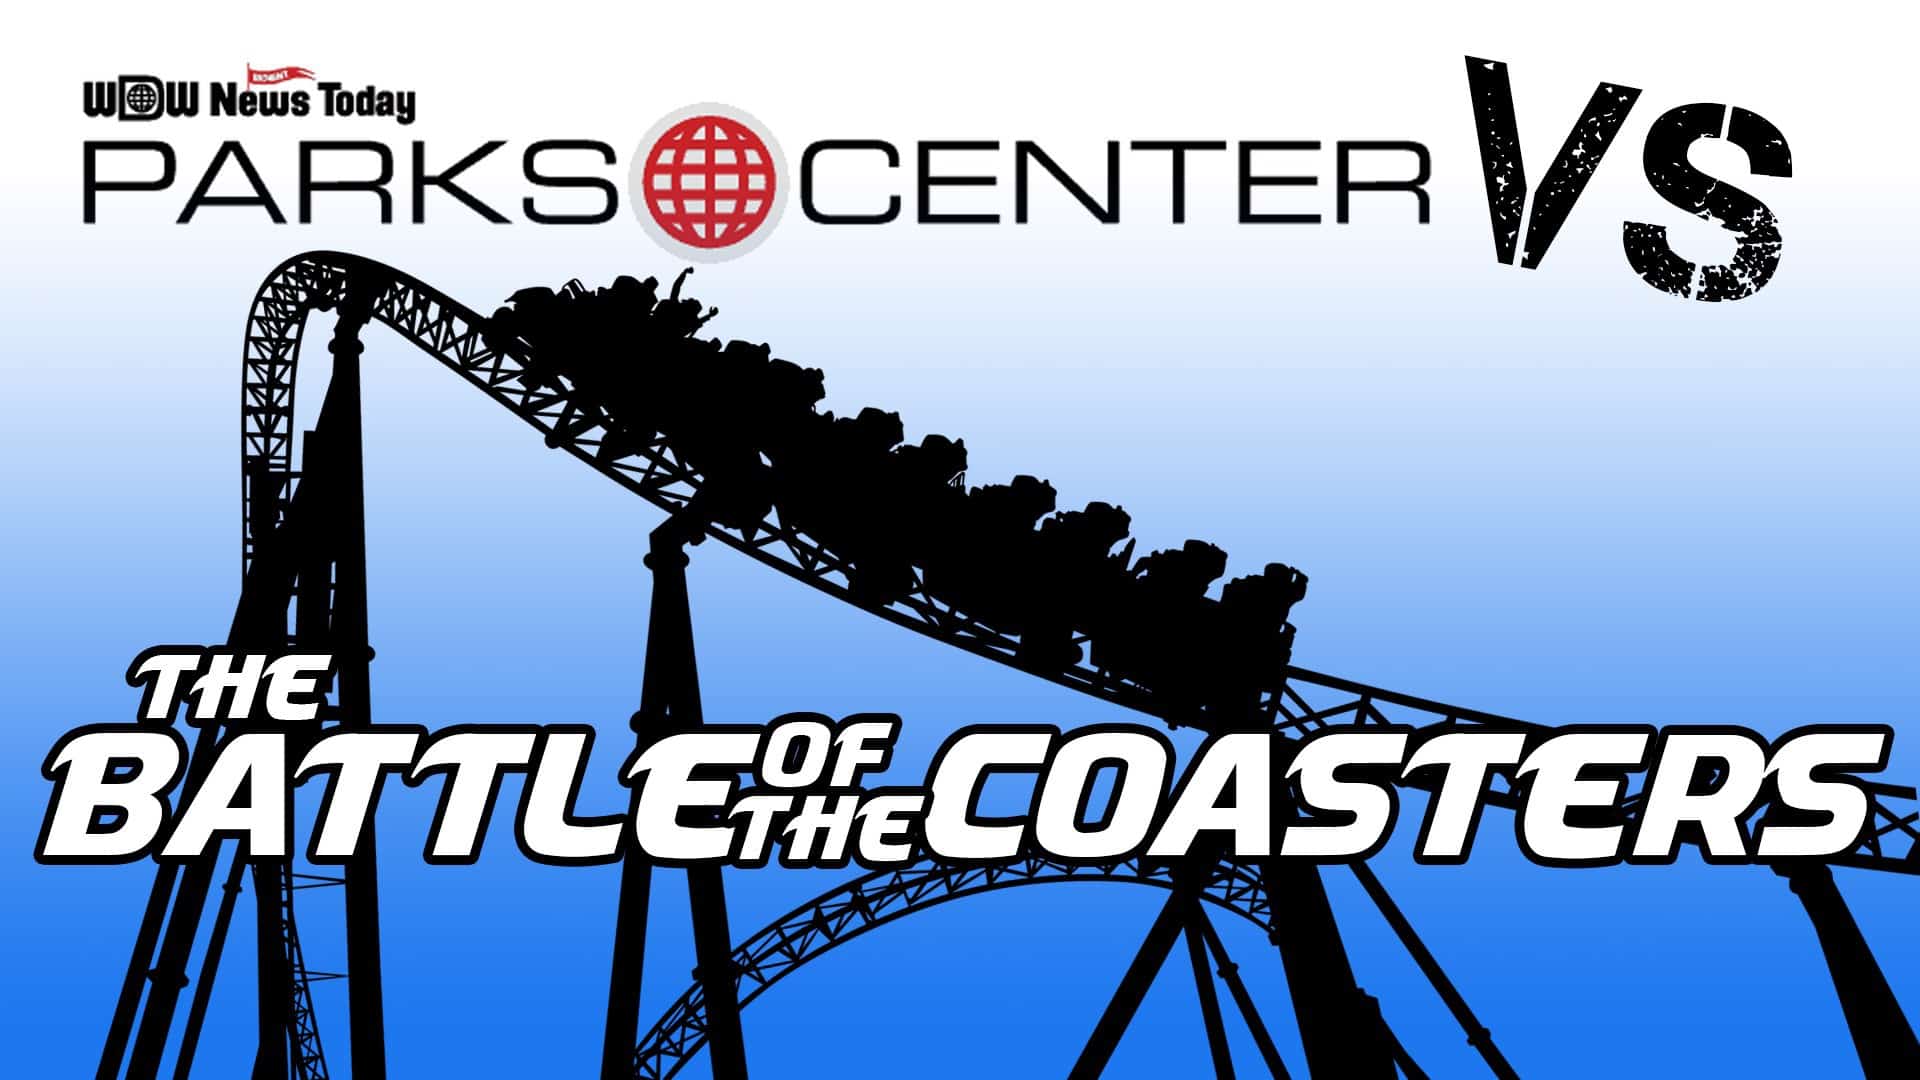 ParksCenter Vs. - The Battle of the Coasters